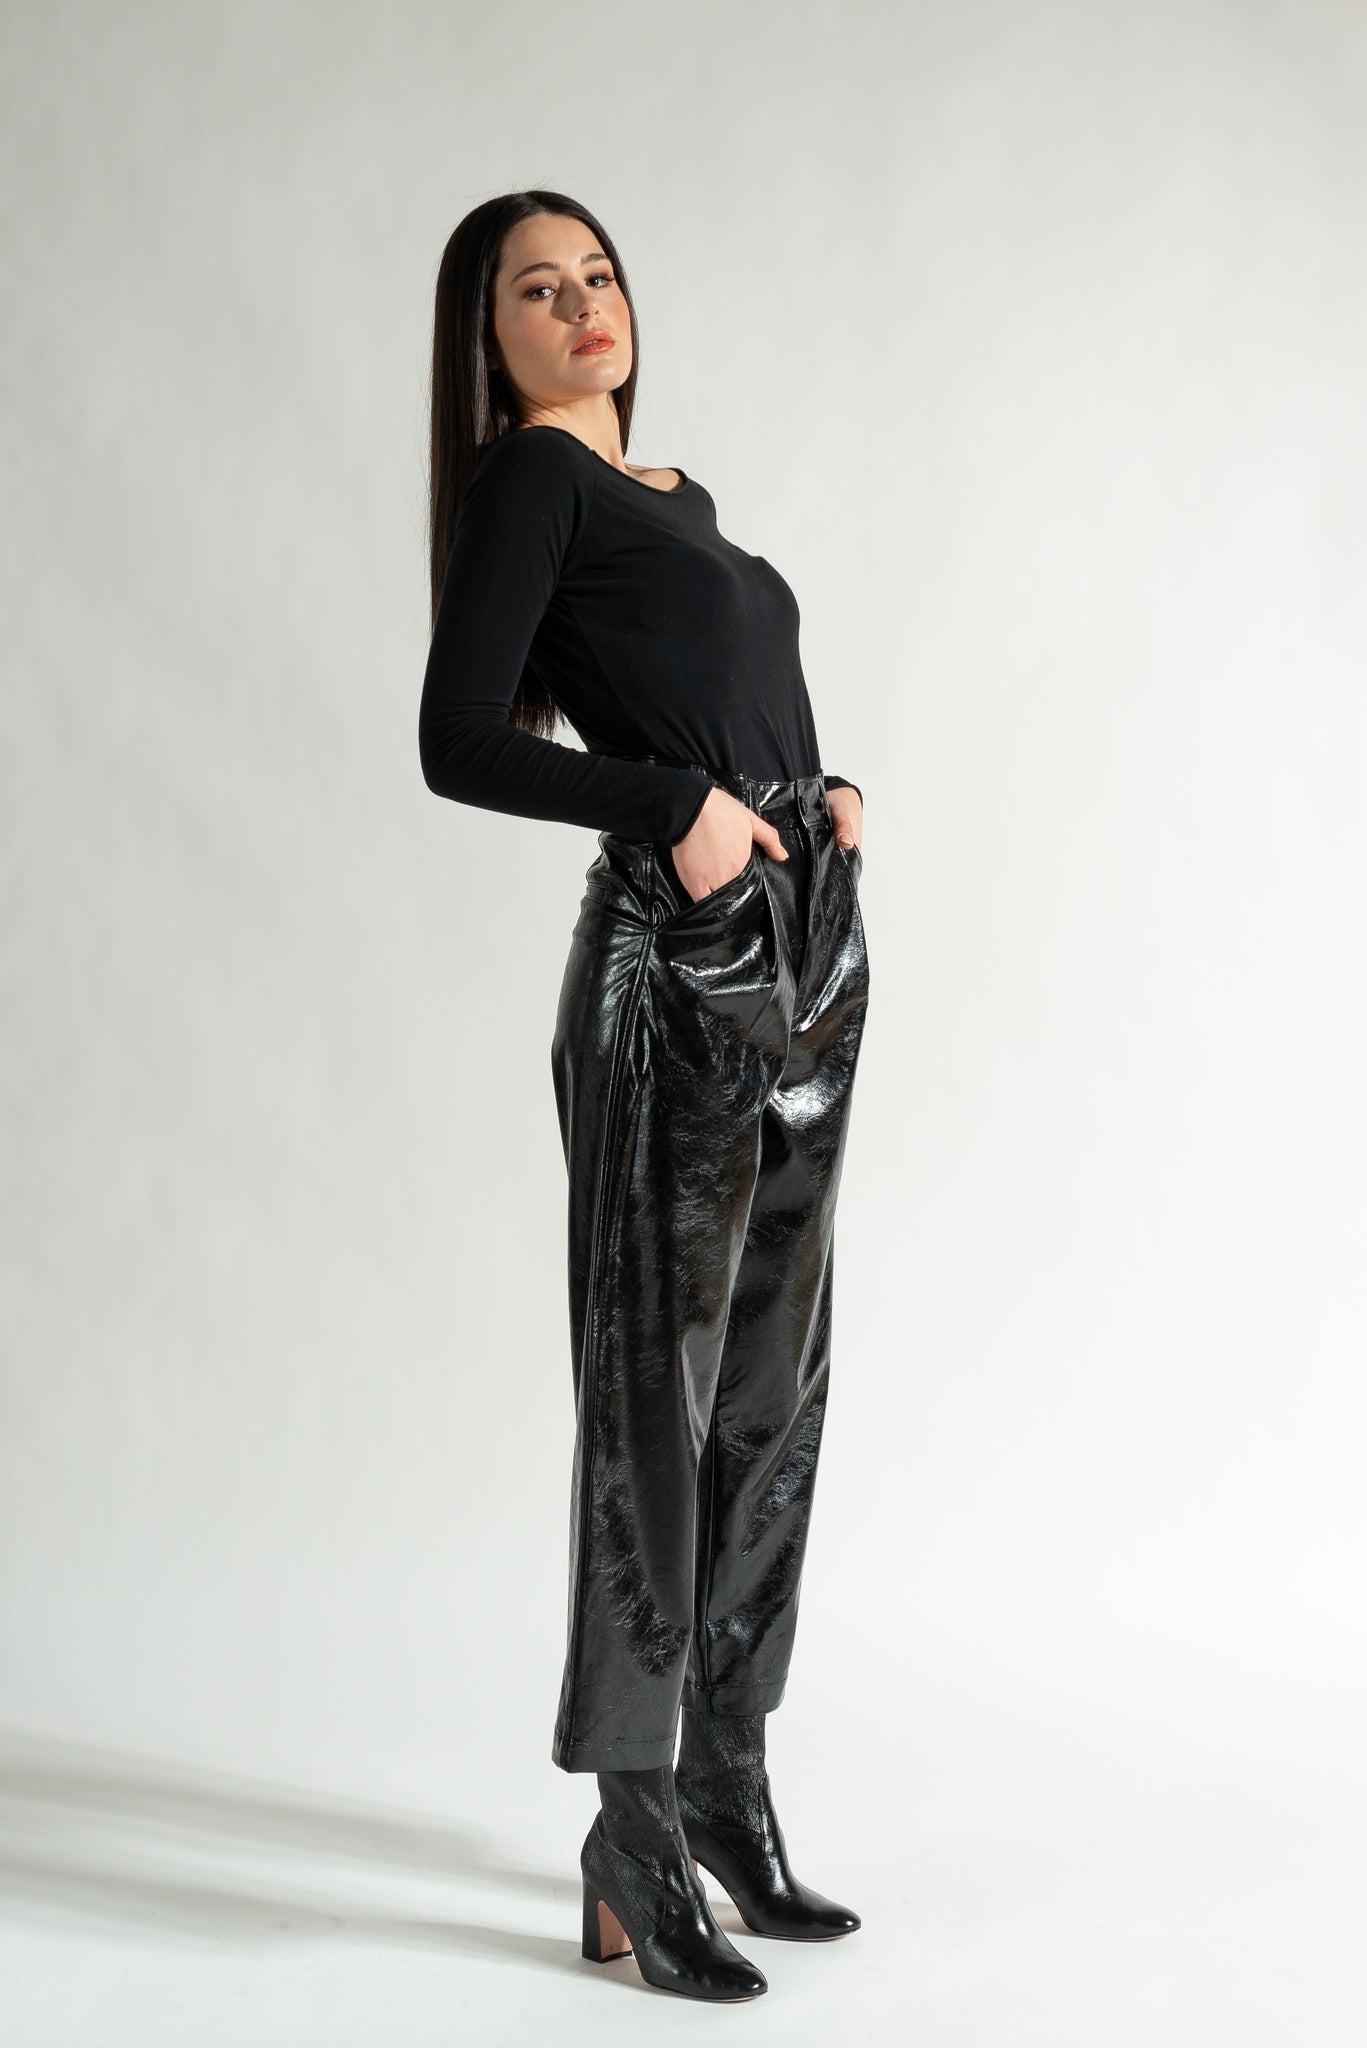 On Board' Black Vegan Leather Trousers - Mistress Rock | Black leather  pants, Leather trousers, All black outfit